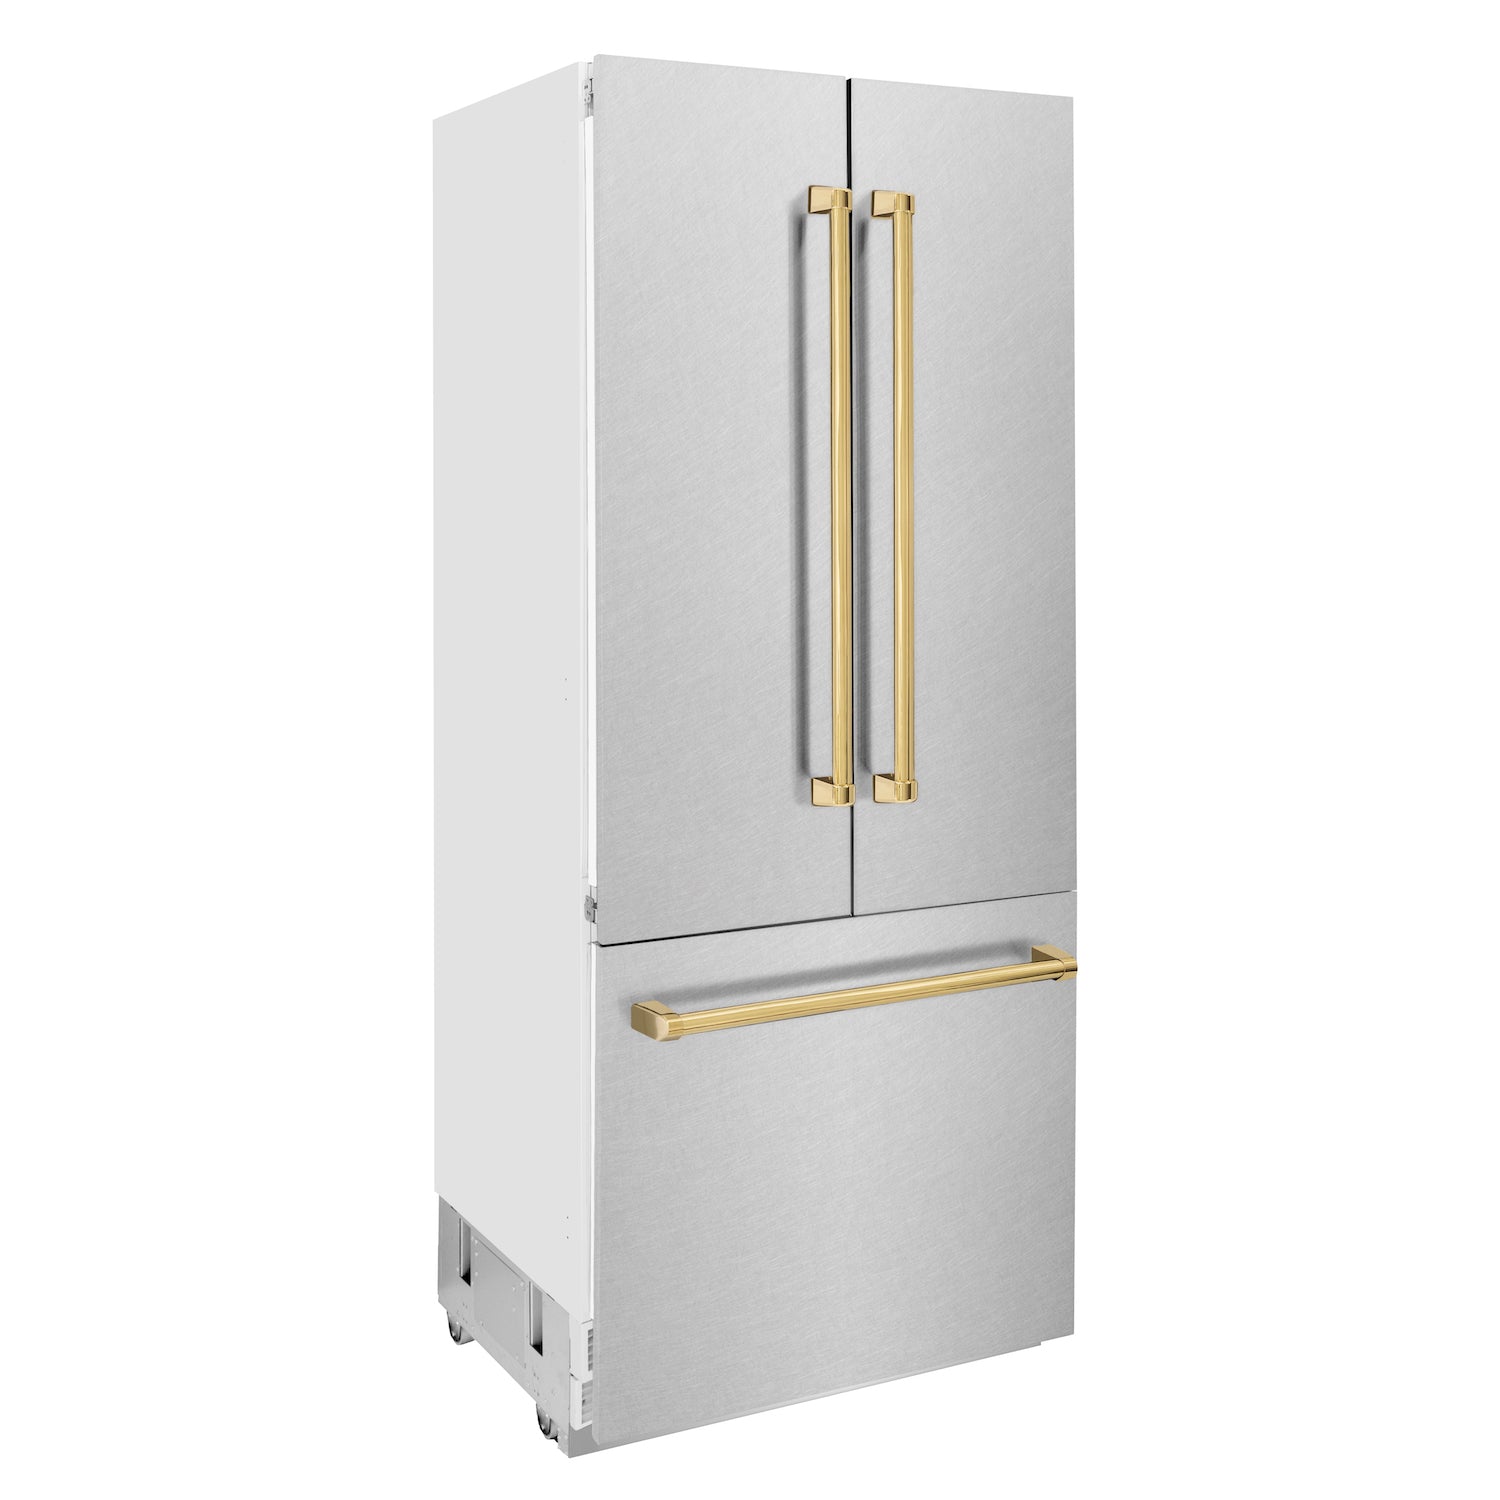 ZLINE Autograph Edition 36 in. 19.6 cu. ft. Built-in 2-Door Bottom Freezer Refrigerator with Internal Water and Ice Dispenser in Fingerprint Resistant Stainless Steel with Polished Gold Accents (RBIVZ-SN-36-G) side, closed.